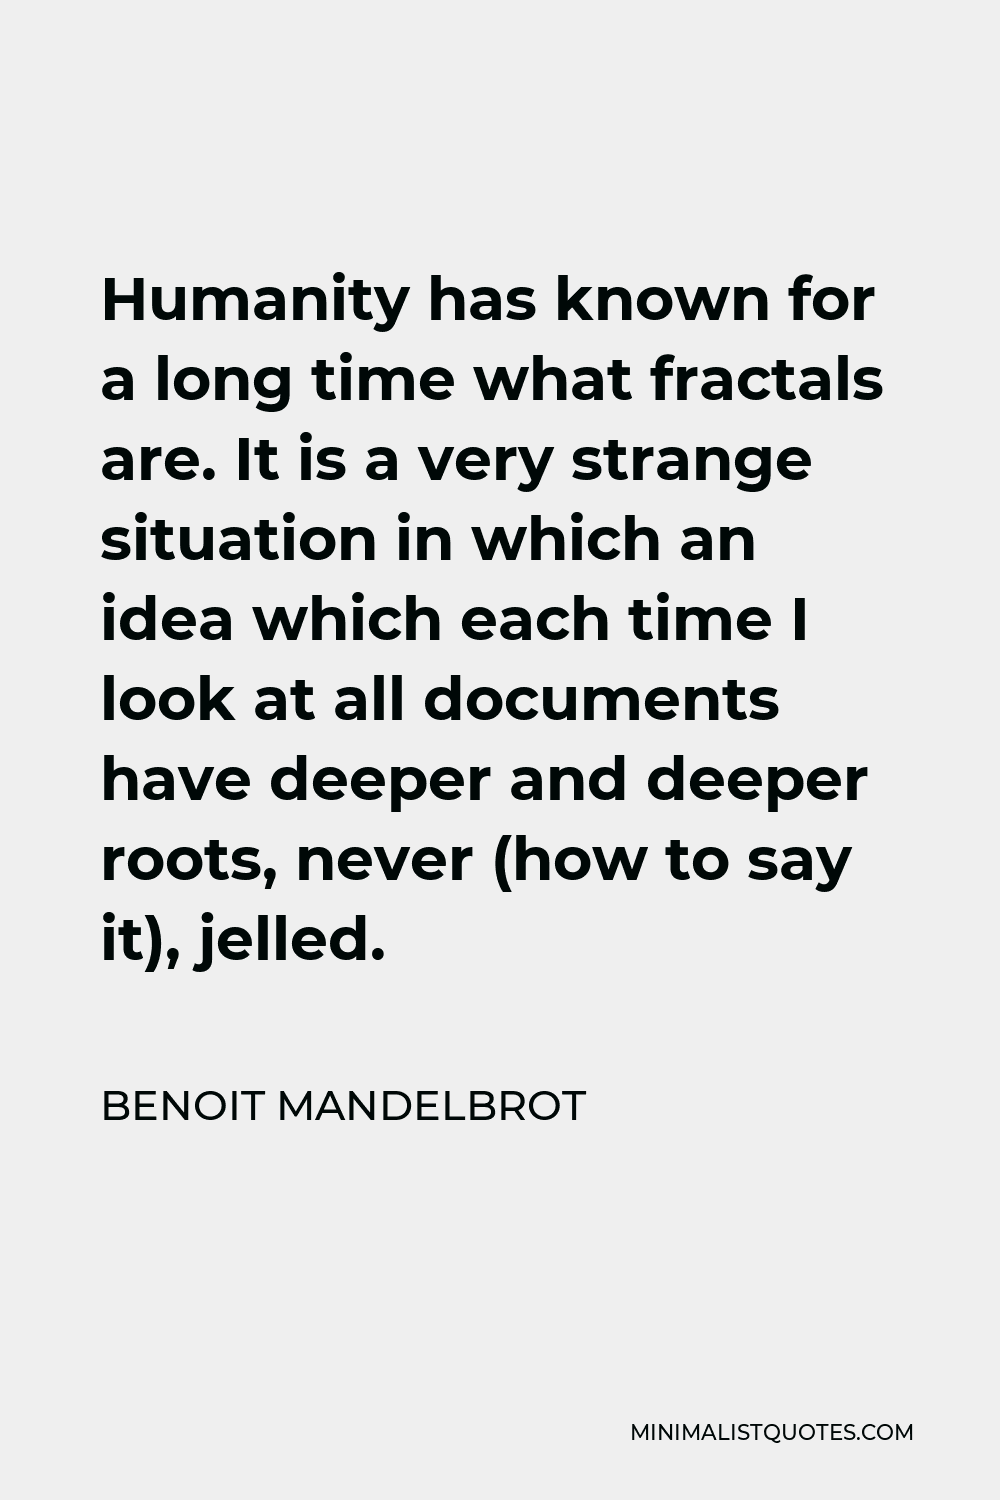 Benoit Mandelbrot Quote - Humanity has known for a long time what fractals are. It is a very strange situation in which an idea which each time I look at all documents have deeper and deeper roots, never (how to say it), jelled.